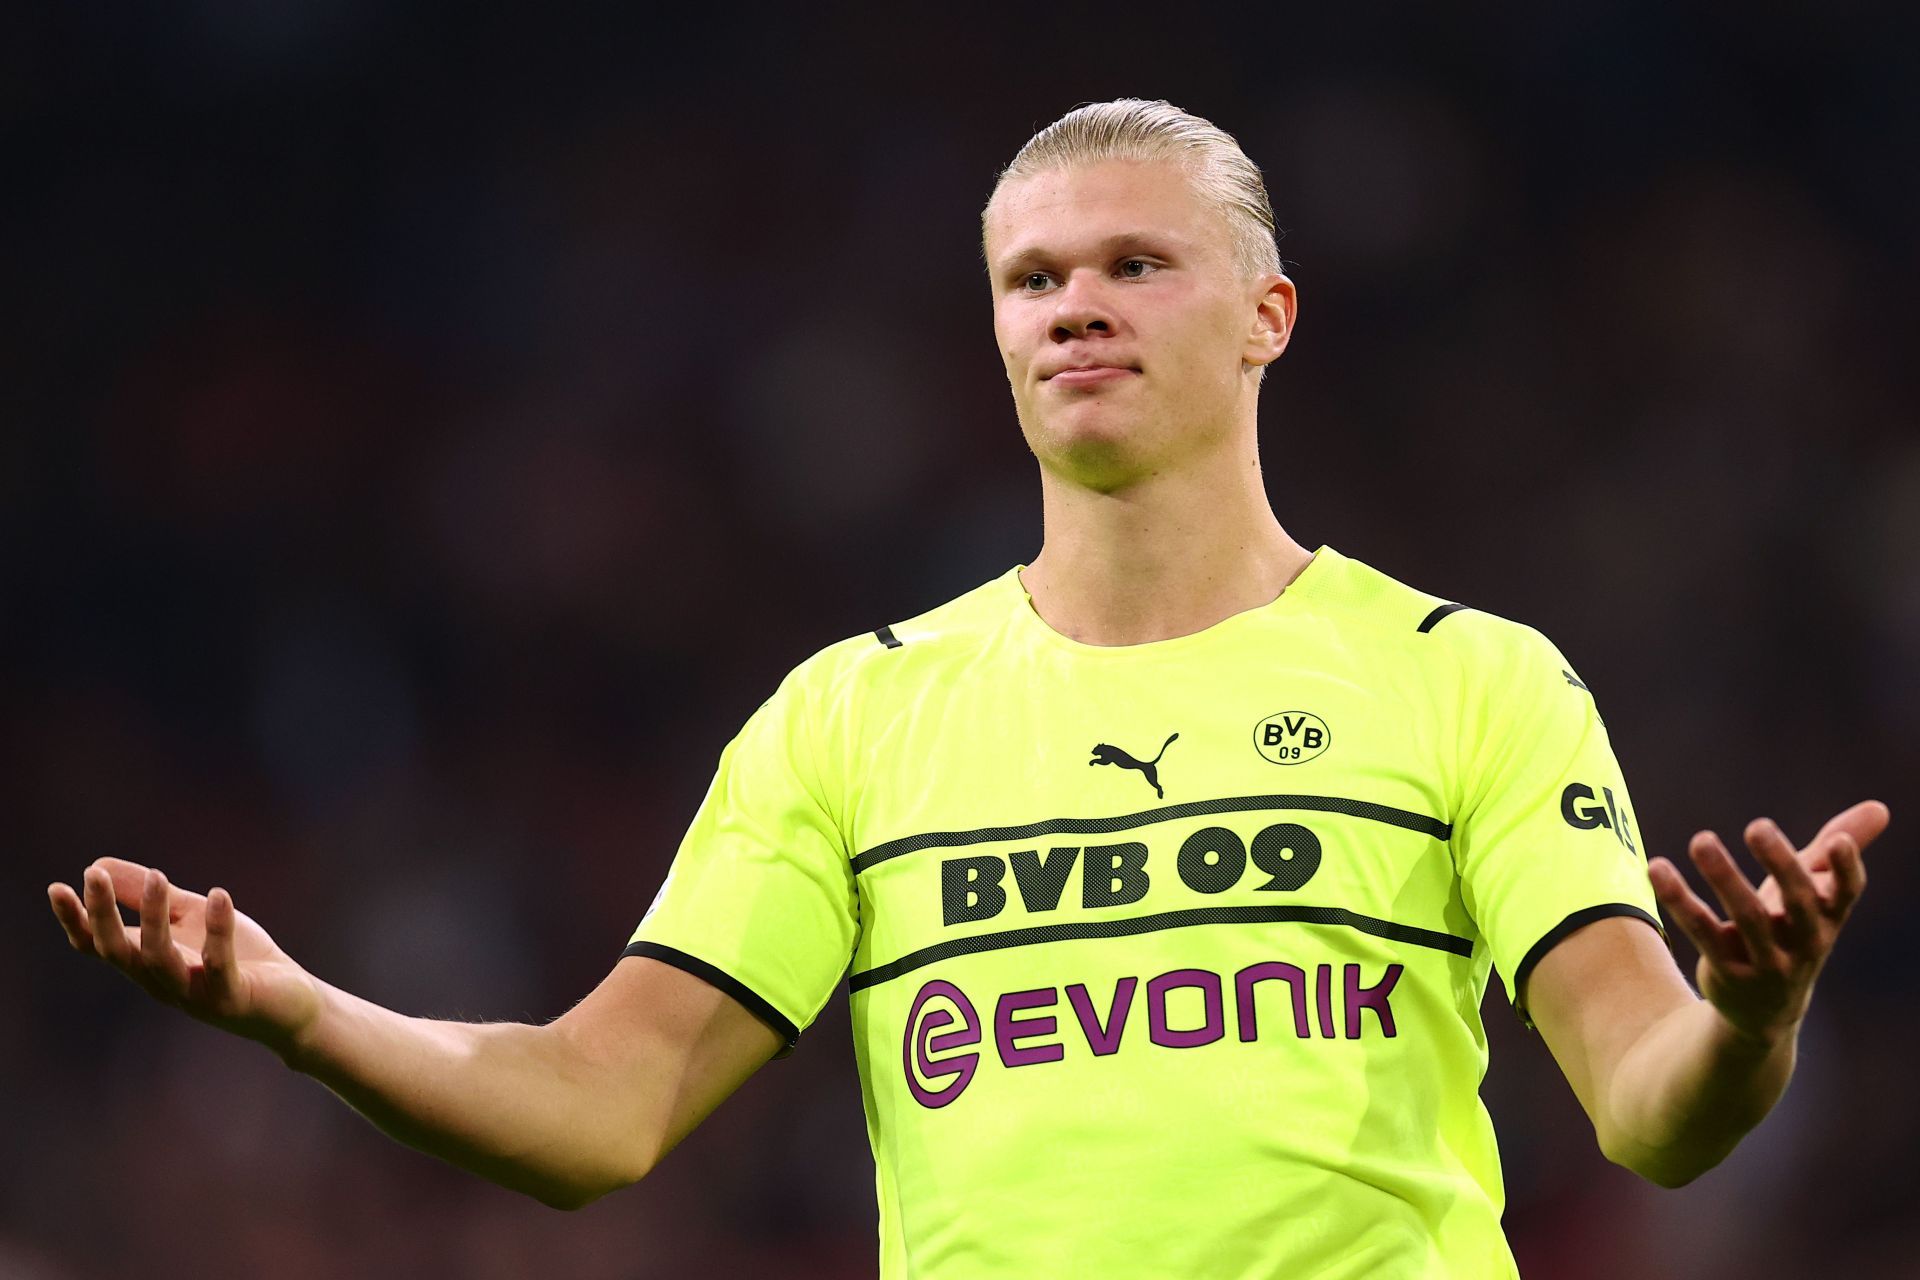 Erling Haaland has been on a tear since joining Borussia Dortmund last year.